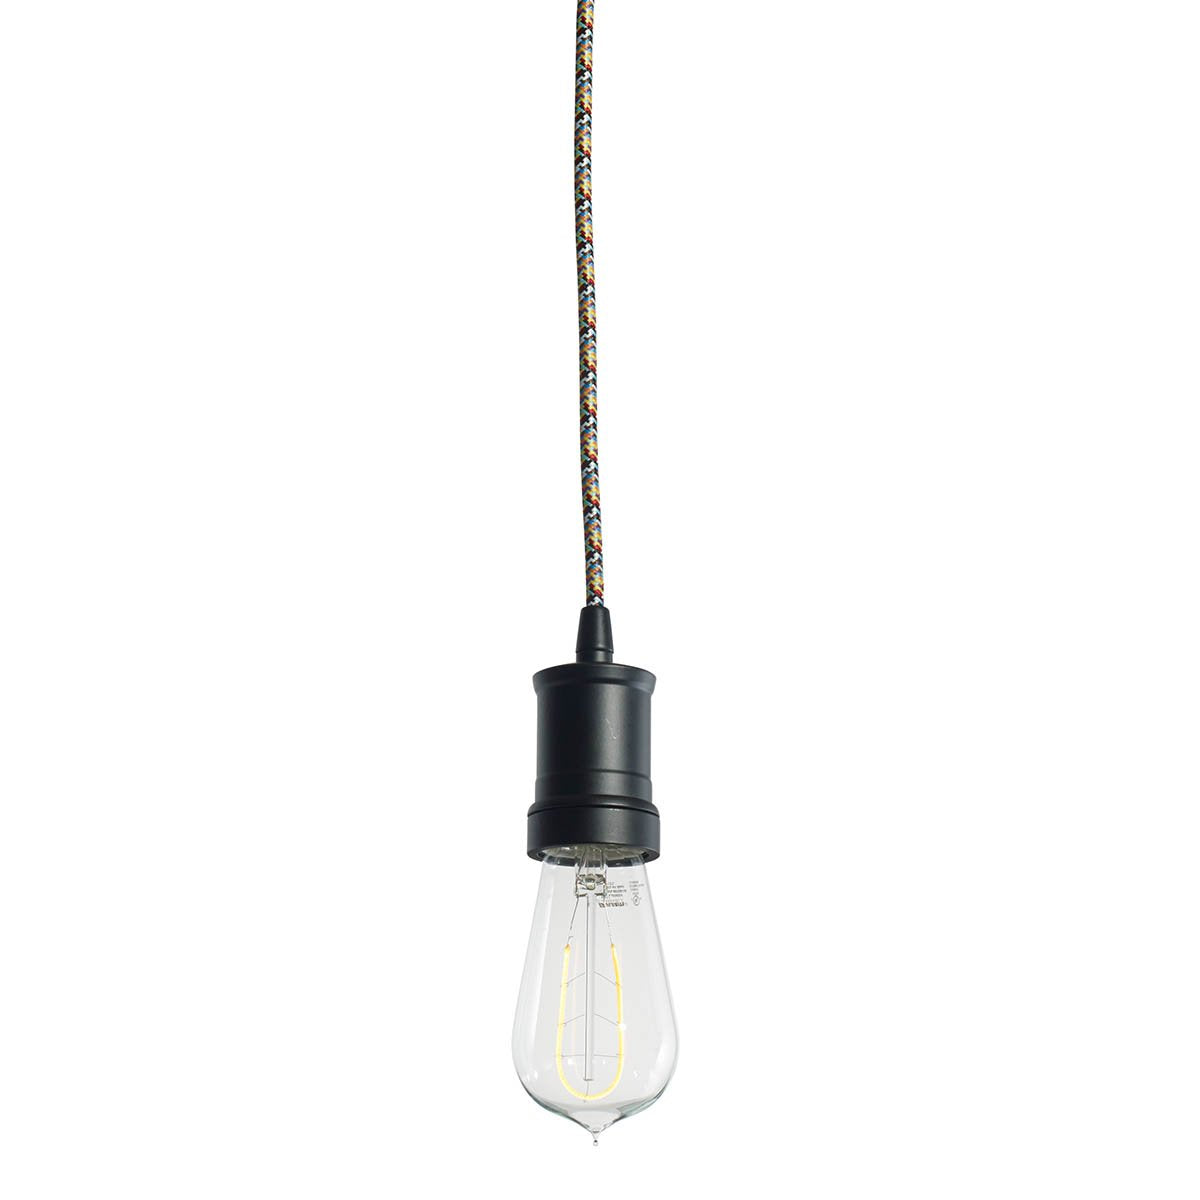 BULBRITE FIXTURES DIRECT WIRE PENDANT KIT CONTEMPORARY BLACK SOCKET WITH MULTI-COLOR CORD AND LED ST18 MEDIUM SCREW (E26) 4W CURVED FILAMENT NOSTALGIC LIGHT BULB 2200K/AMBER LIGHT 40W INCANDESCENT EQUIVALENT 1PK (810086)